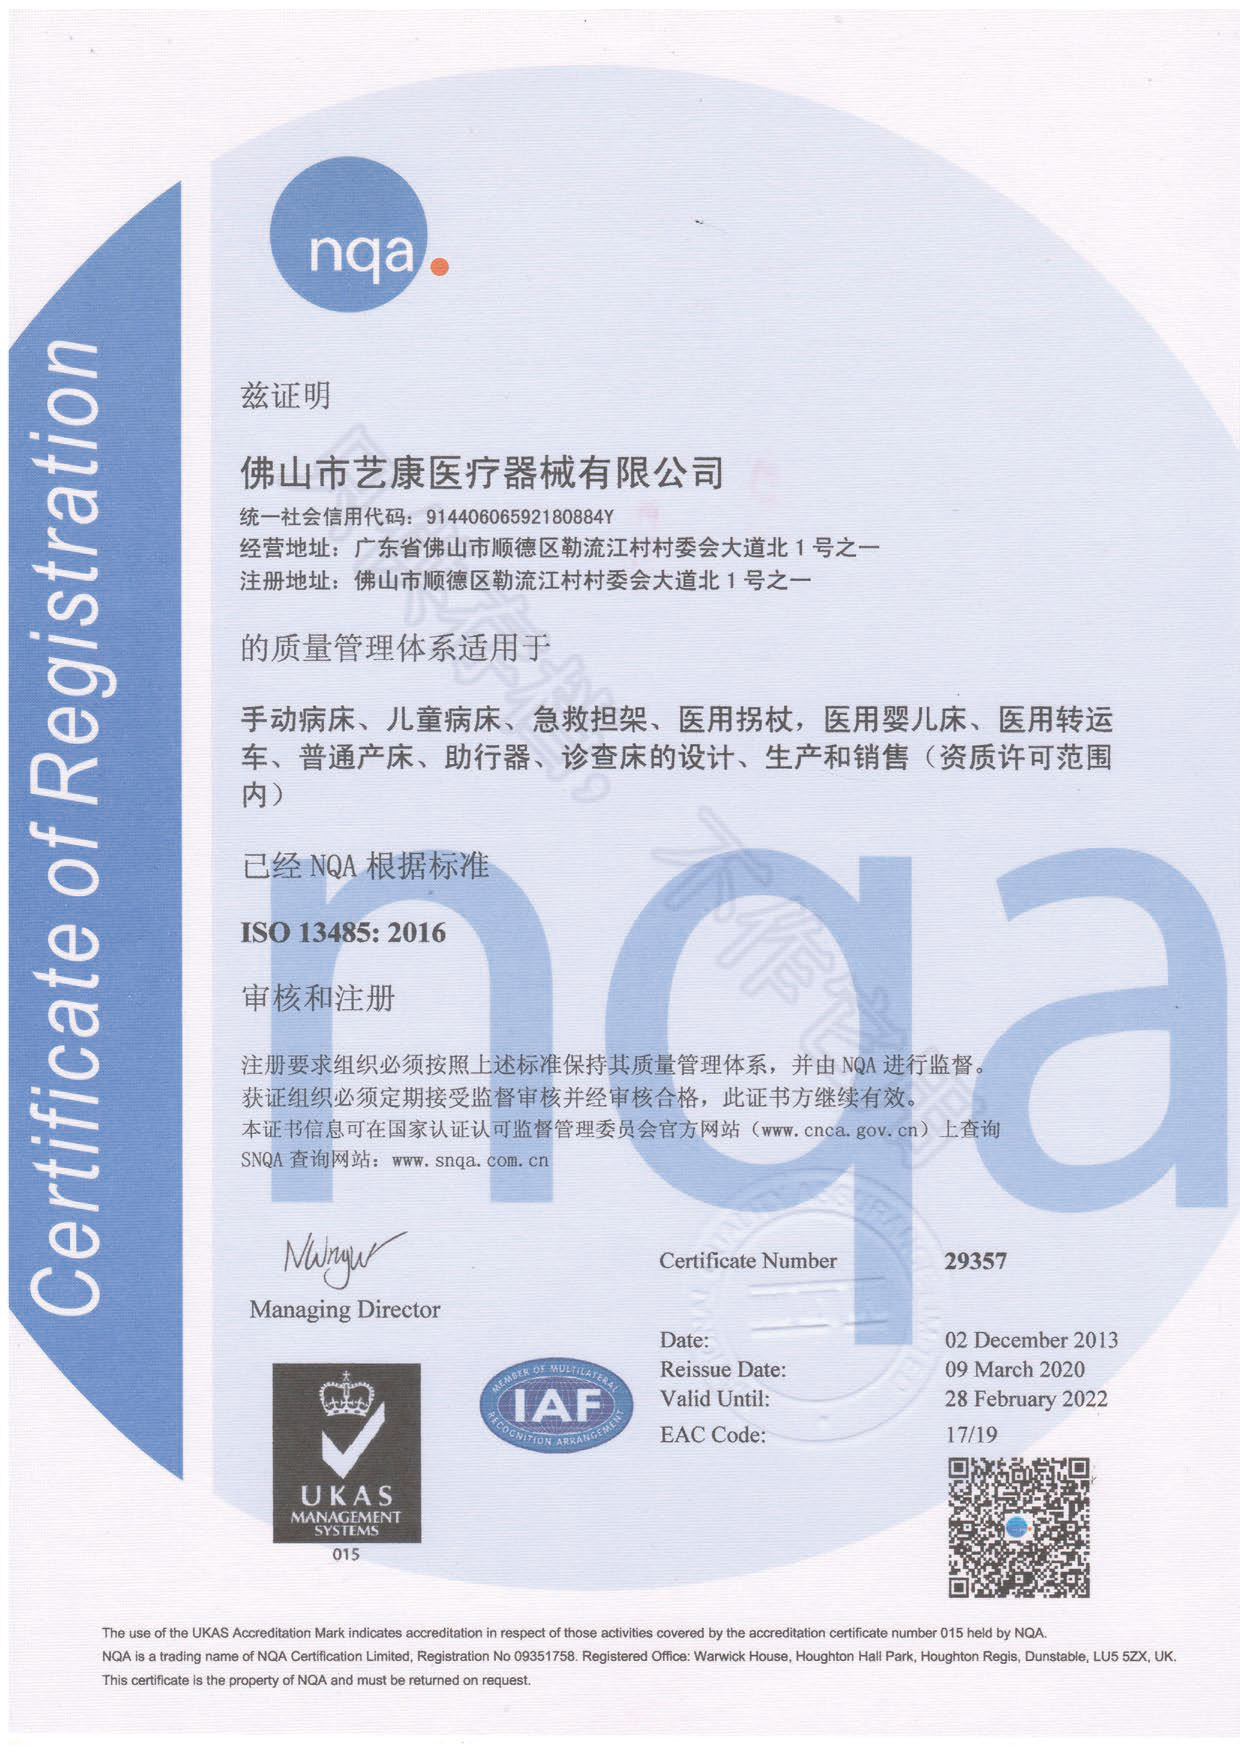 ISO13485 Certificate